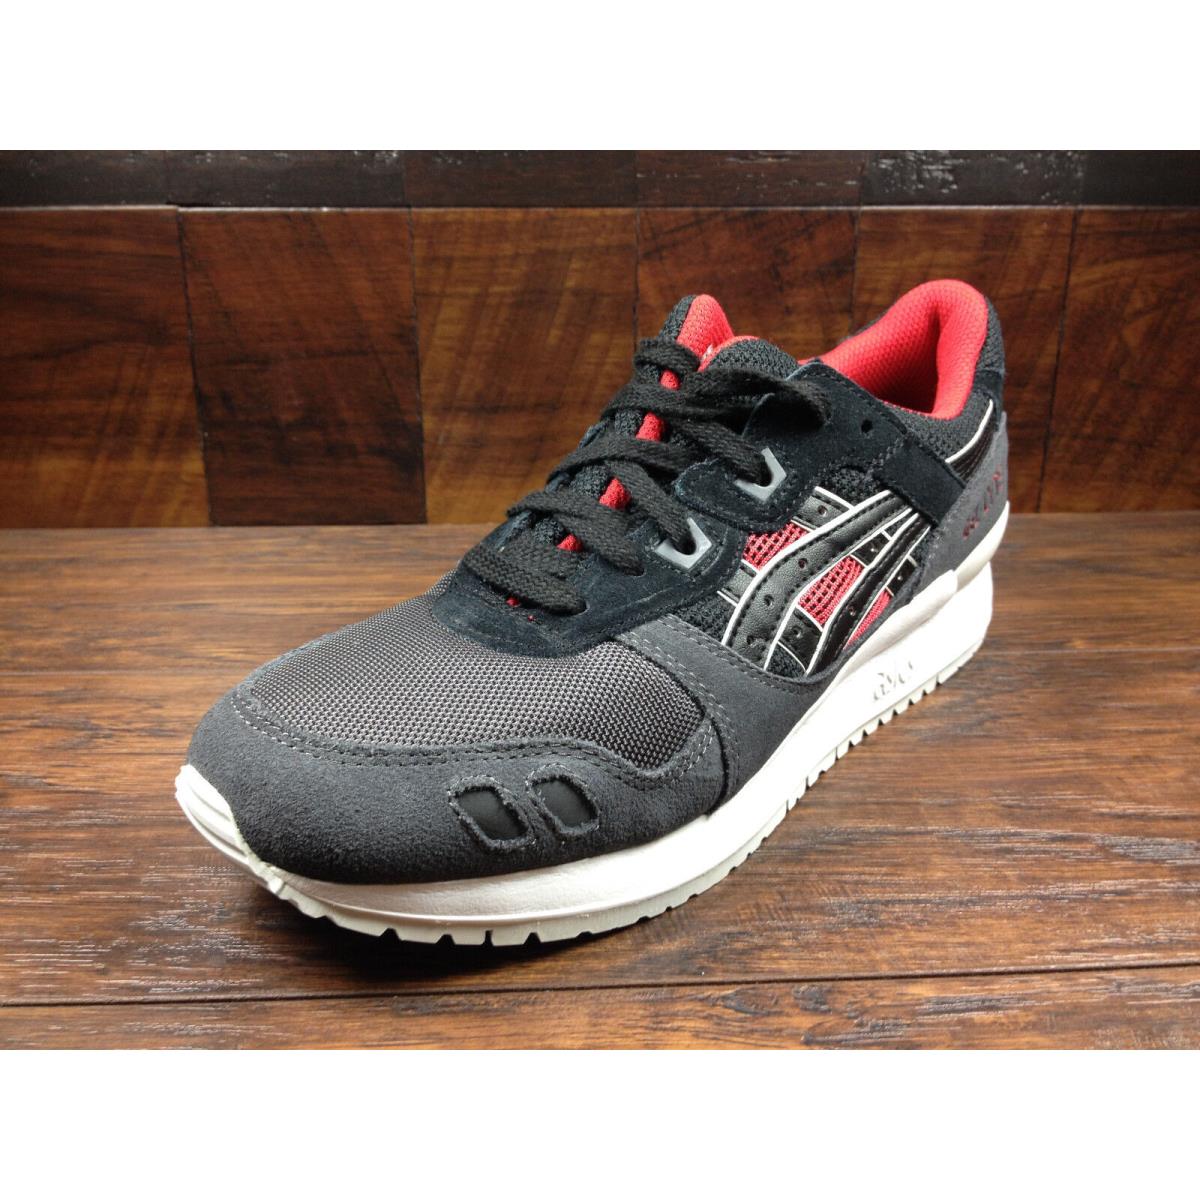 ASICS shoes III - Black / Grey / Red 0